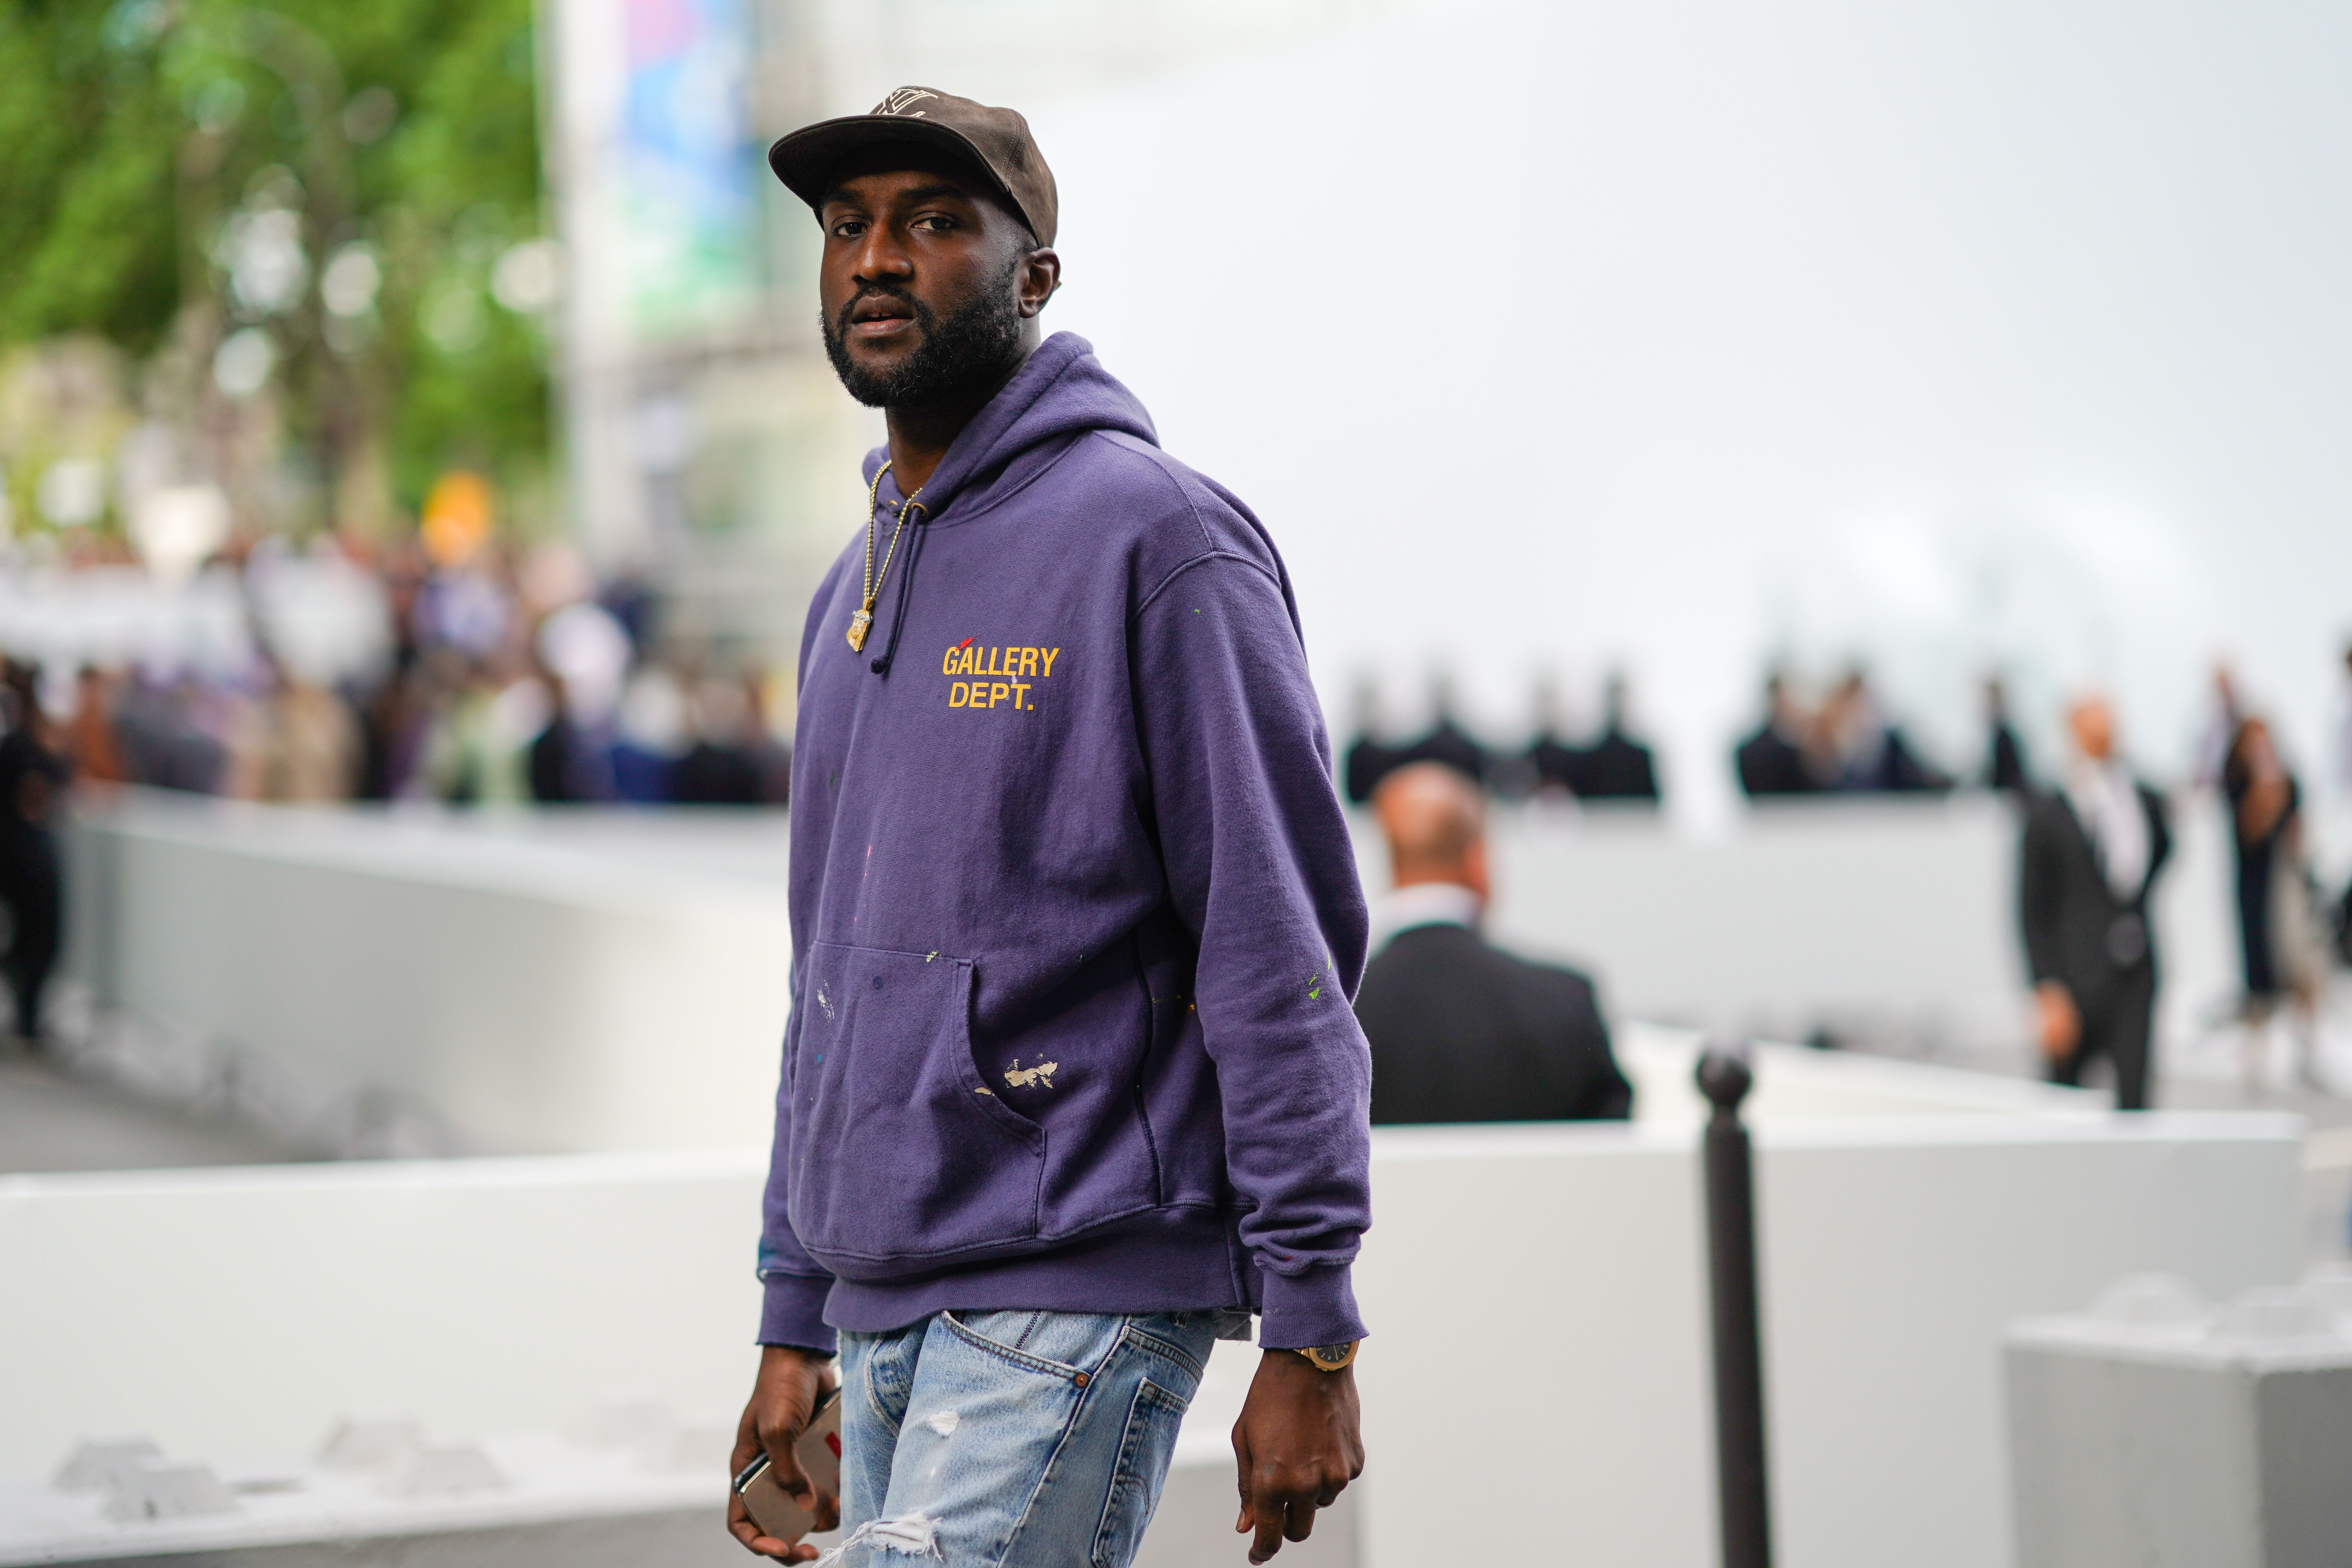 virgil abloh outfits